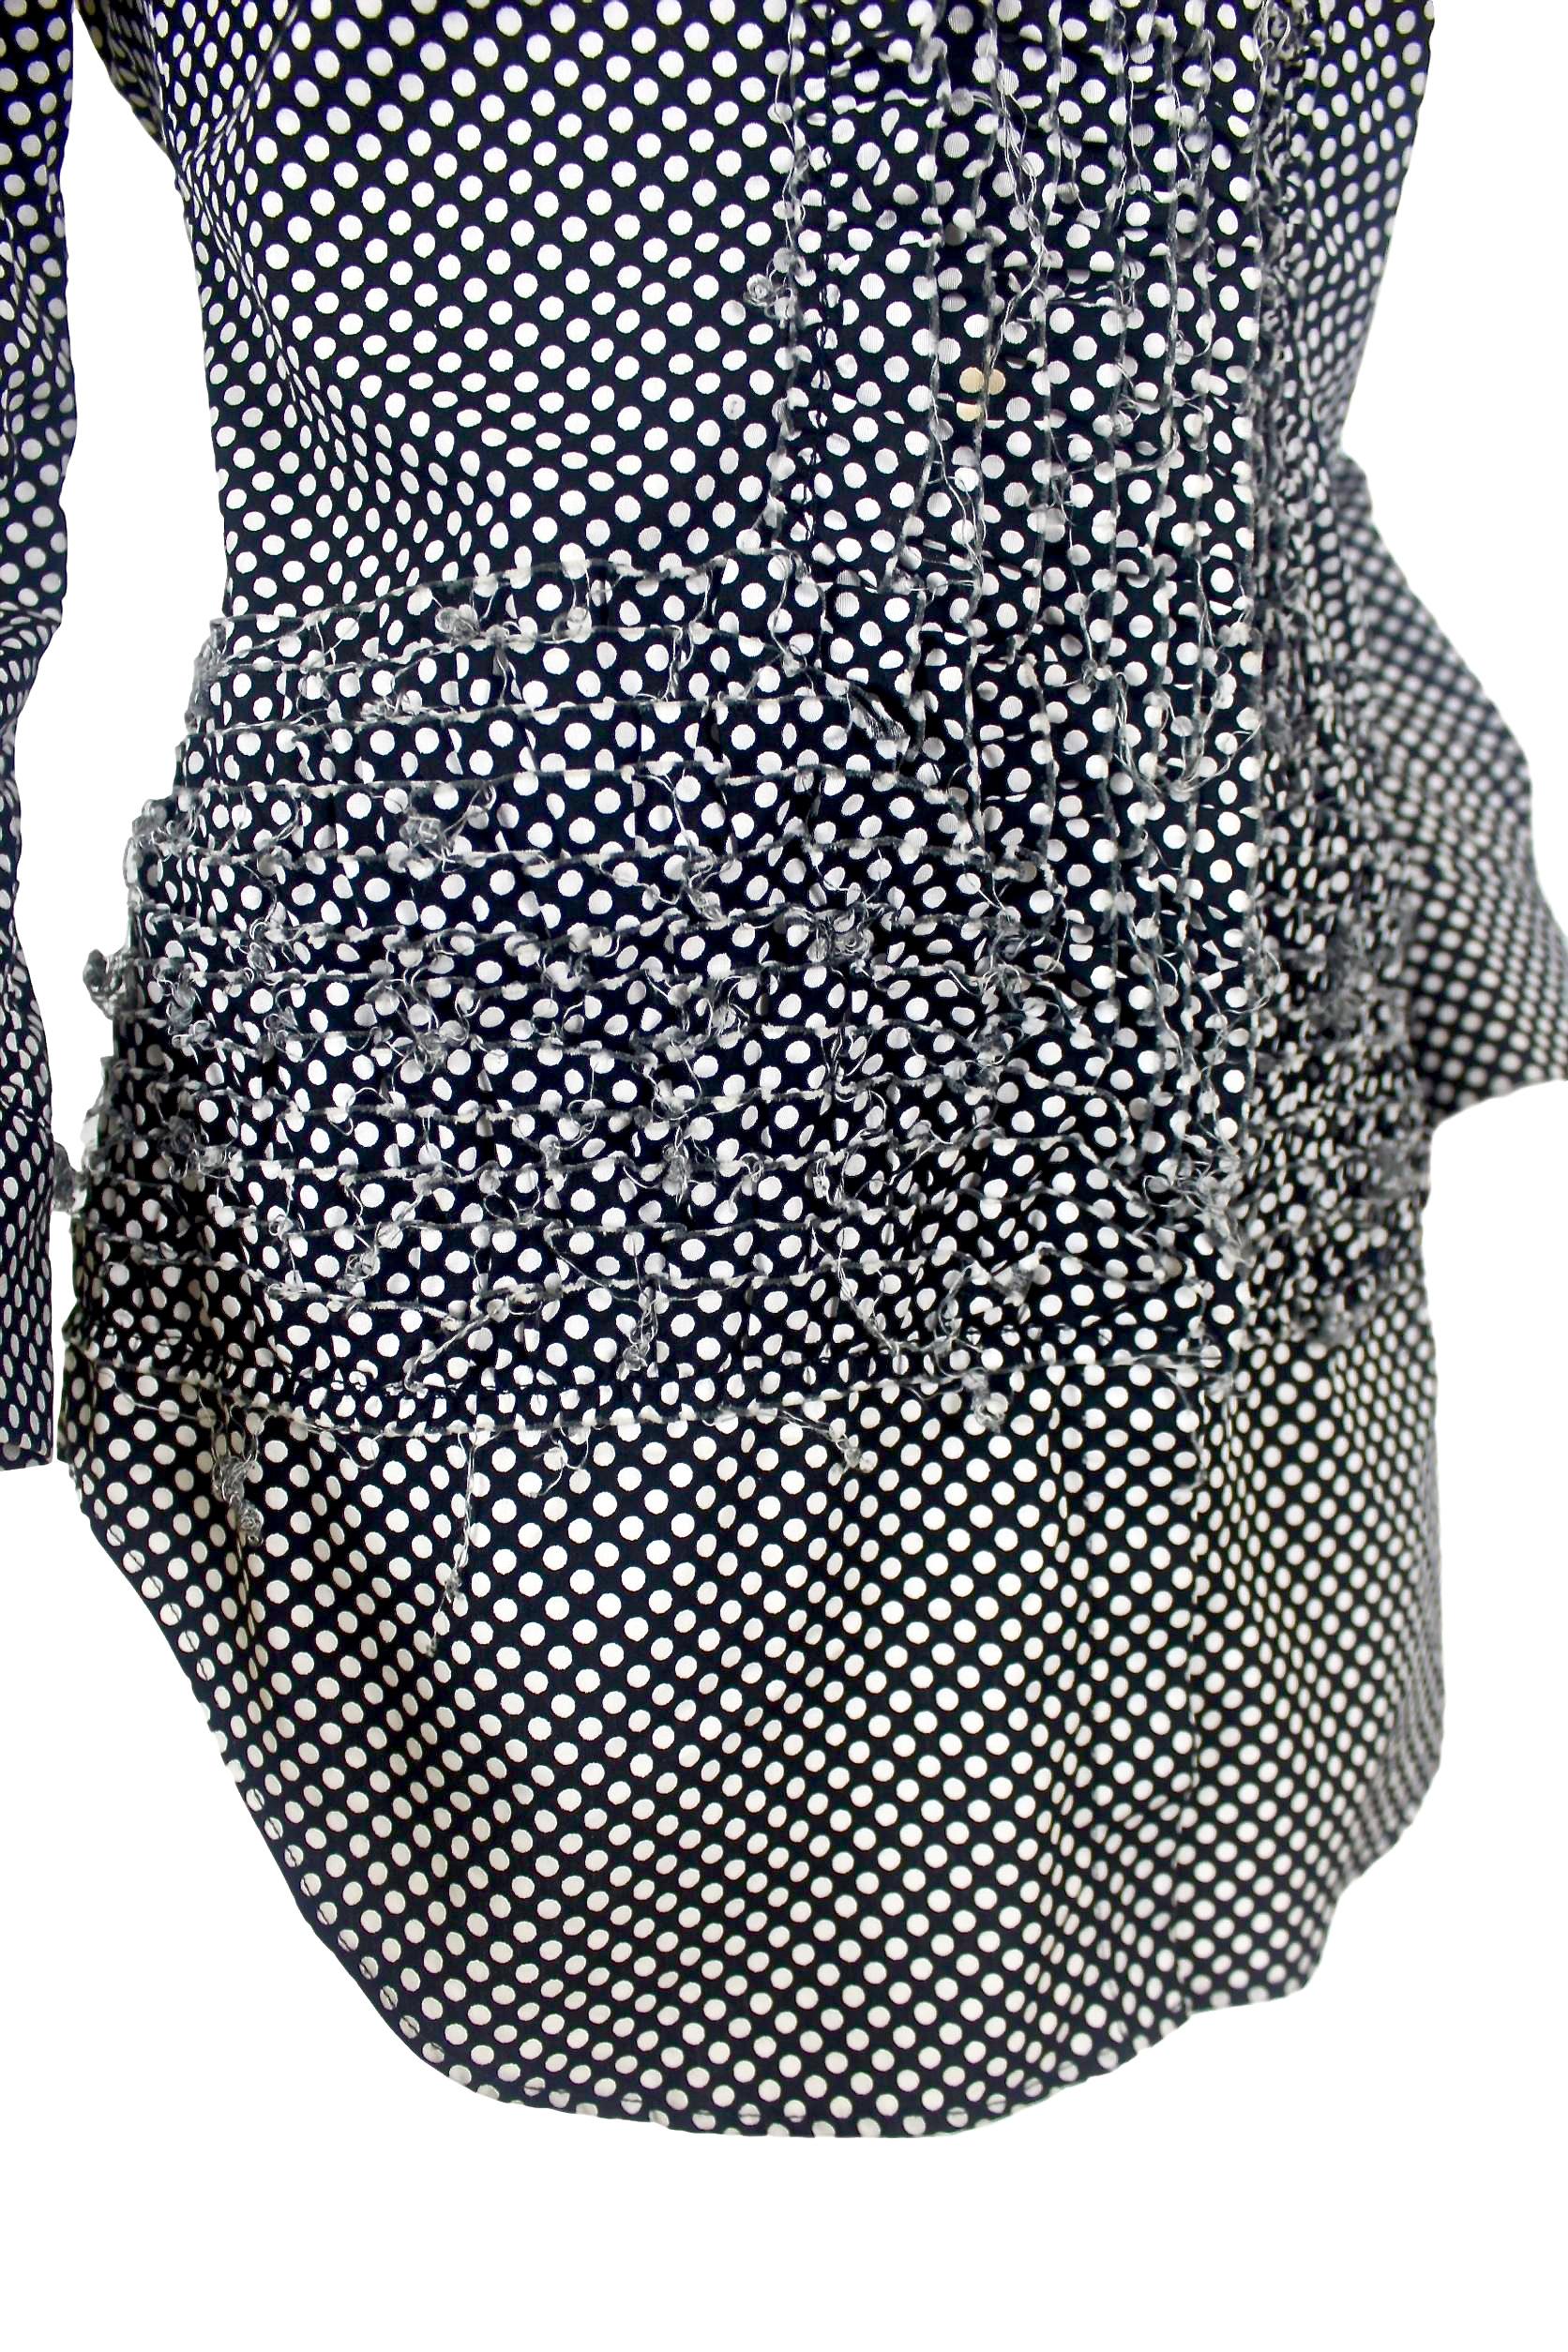 Alexander McQueen 1990s Polka Dot Shirt In Good Condition For Sale In Bath, GB